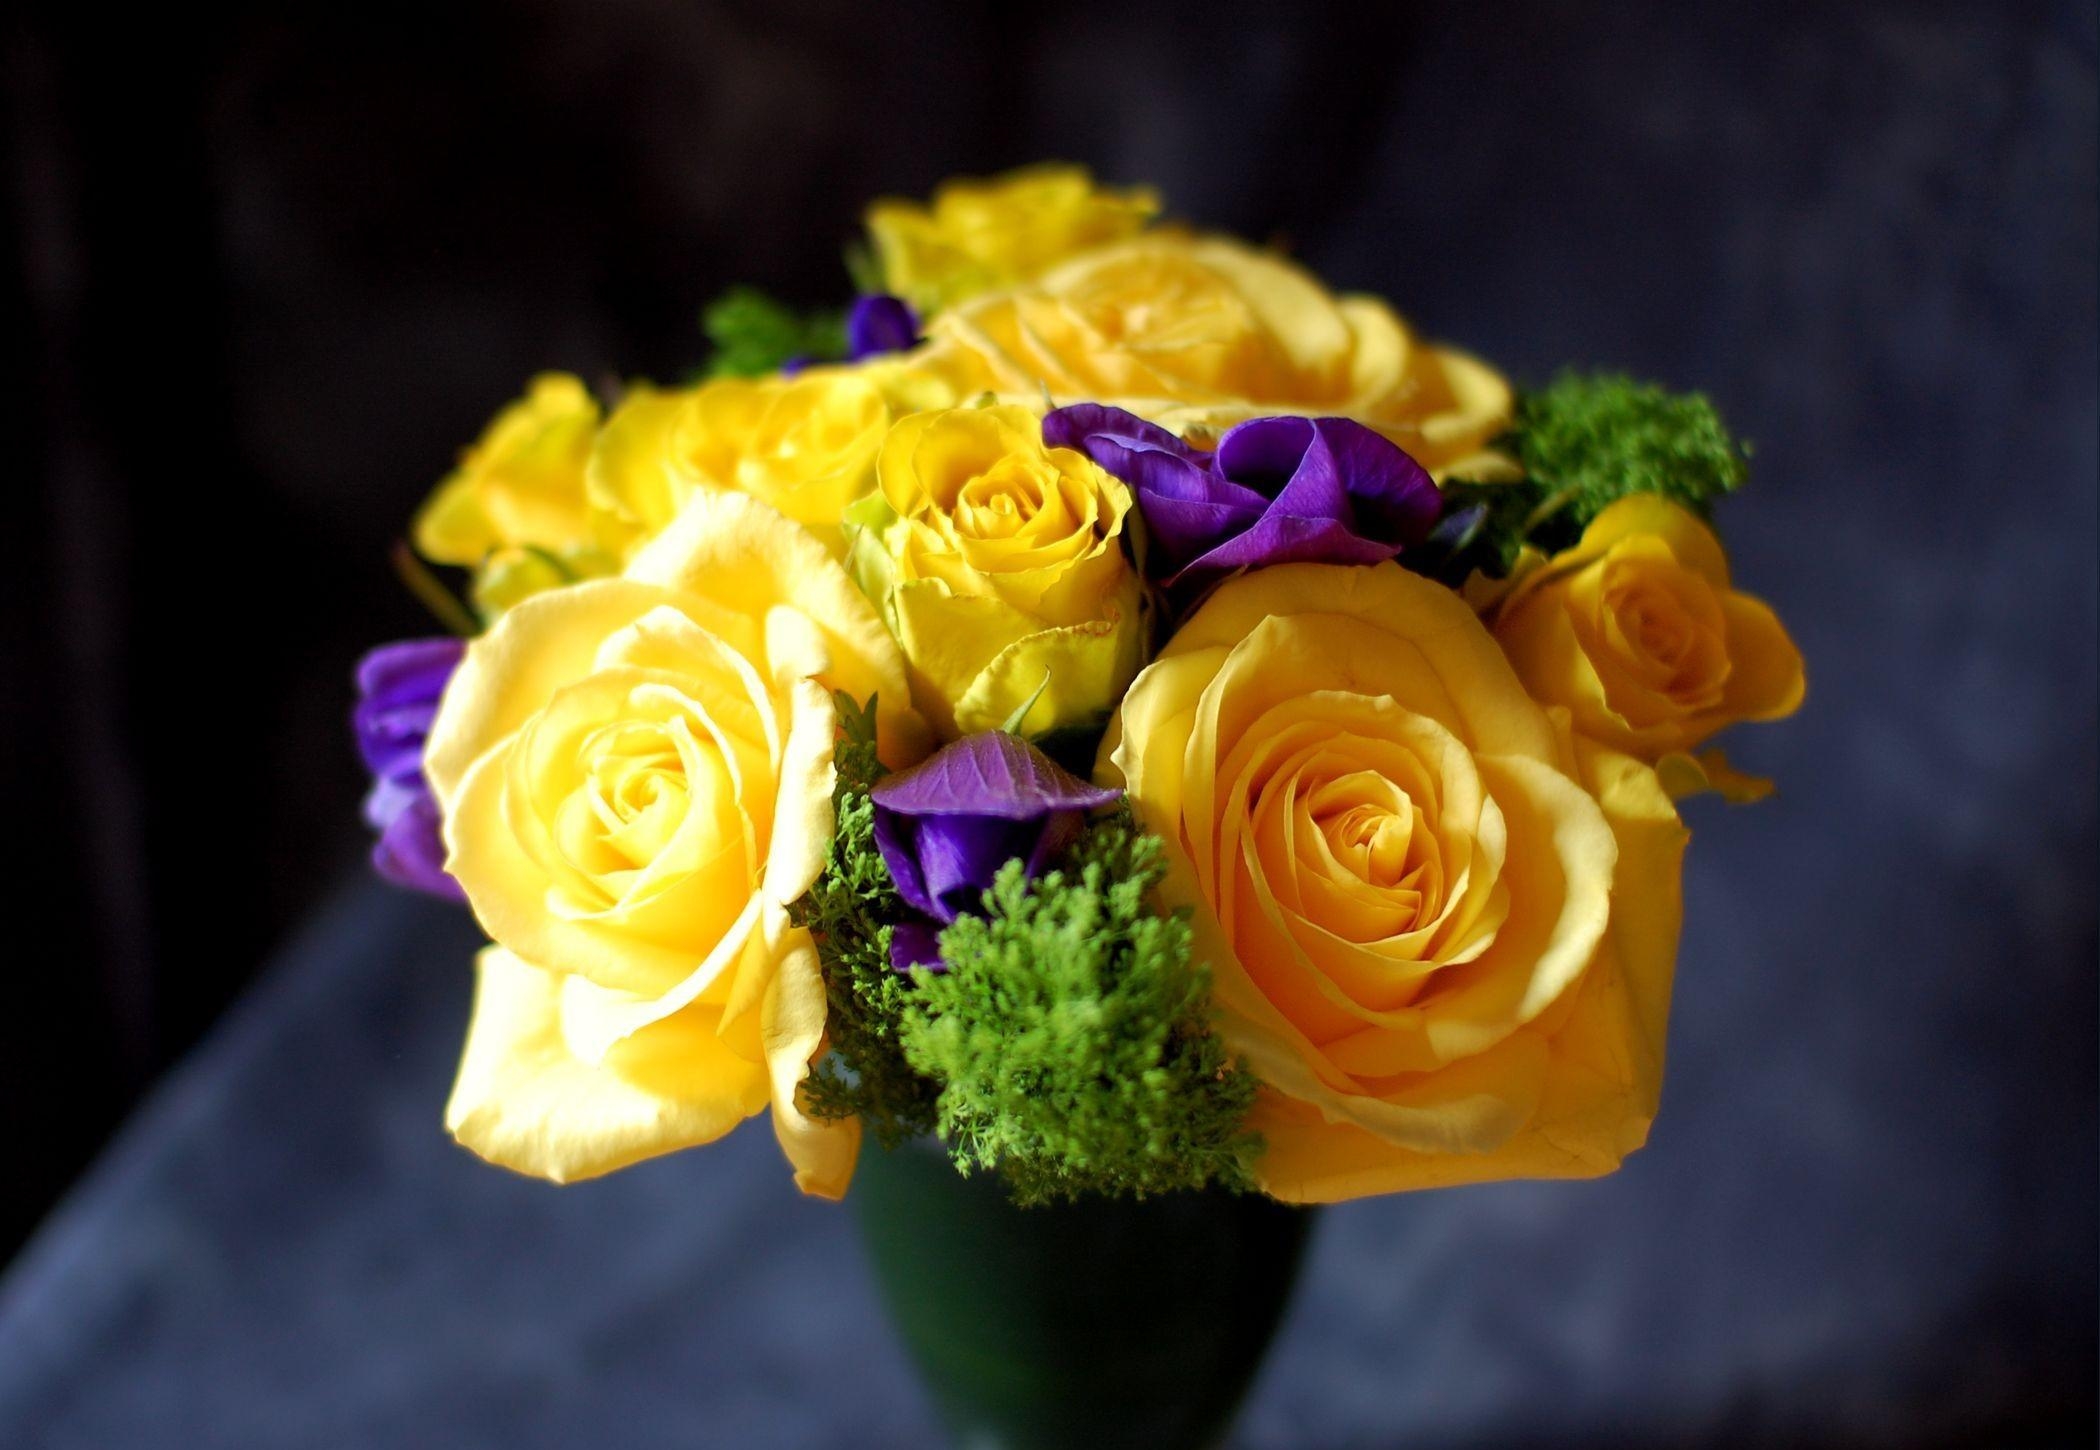 A beautiful bouquet of yellow roses